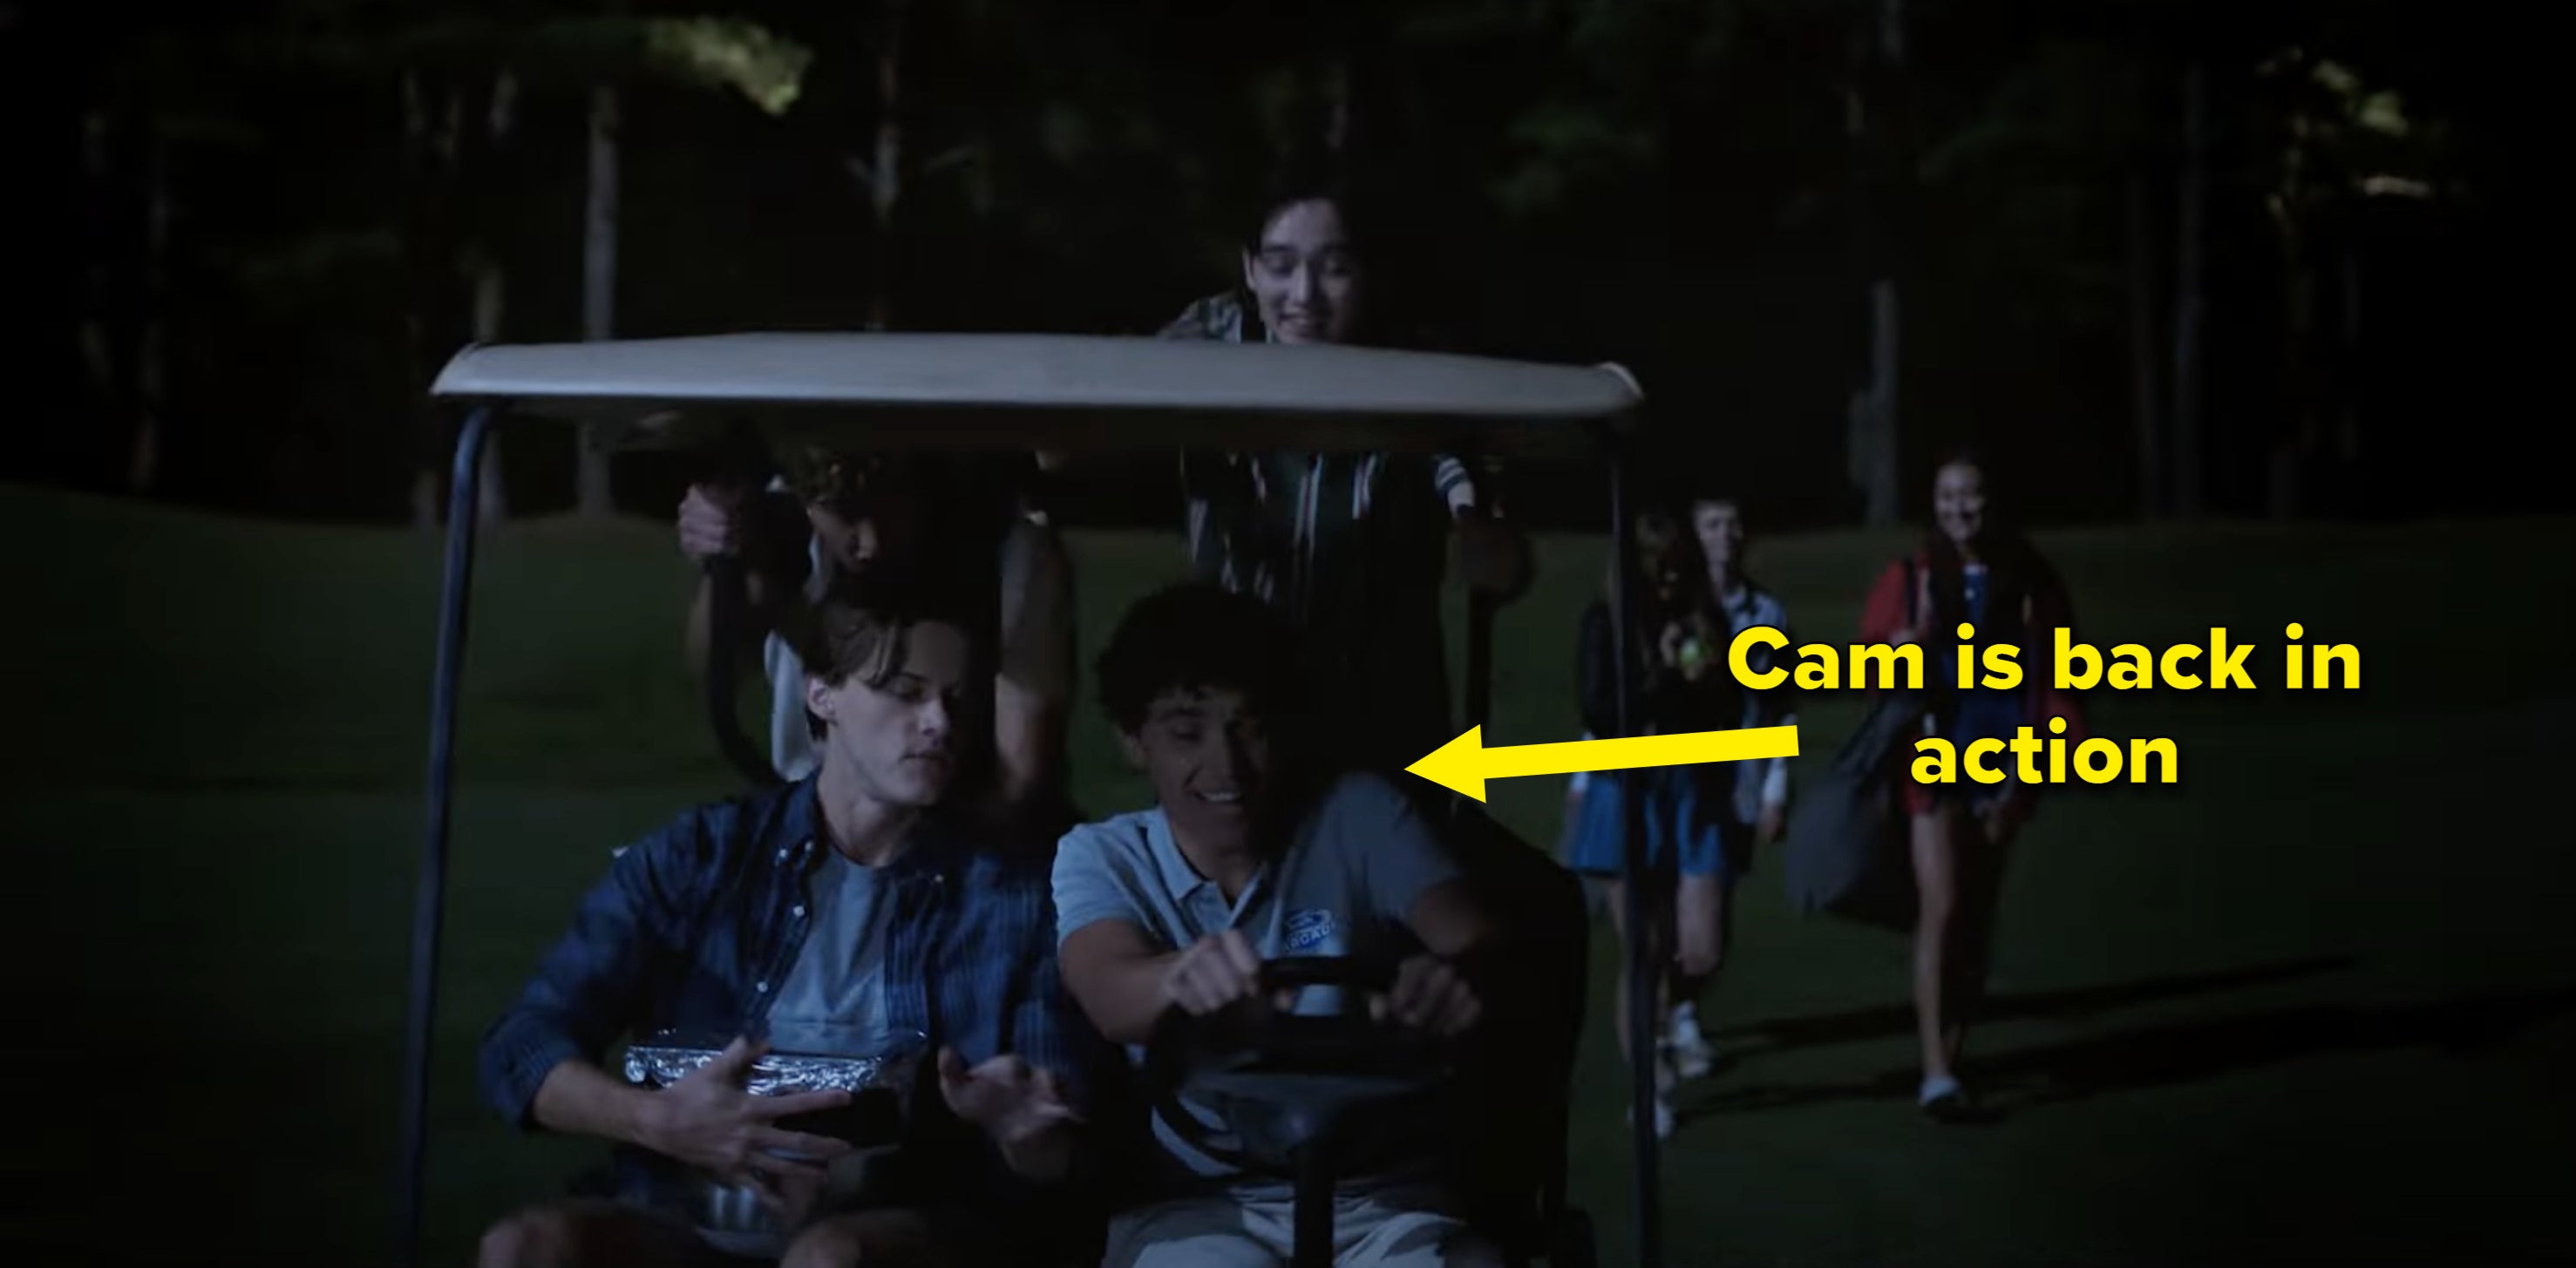 Cam driving two others in a golf cart at night